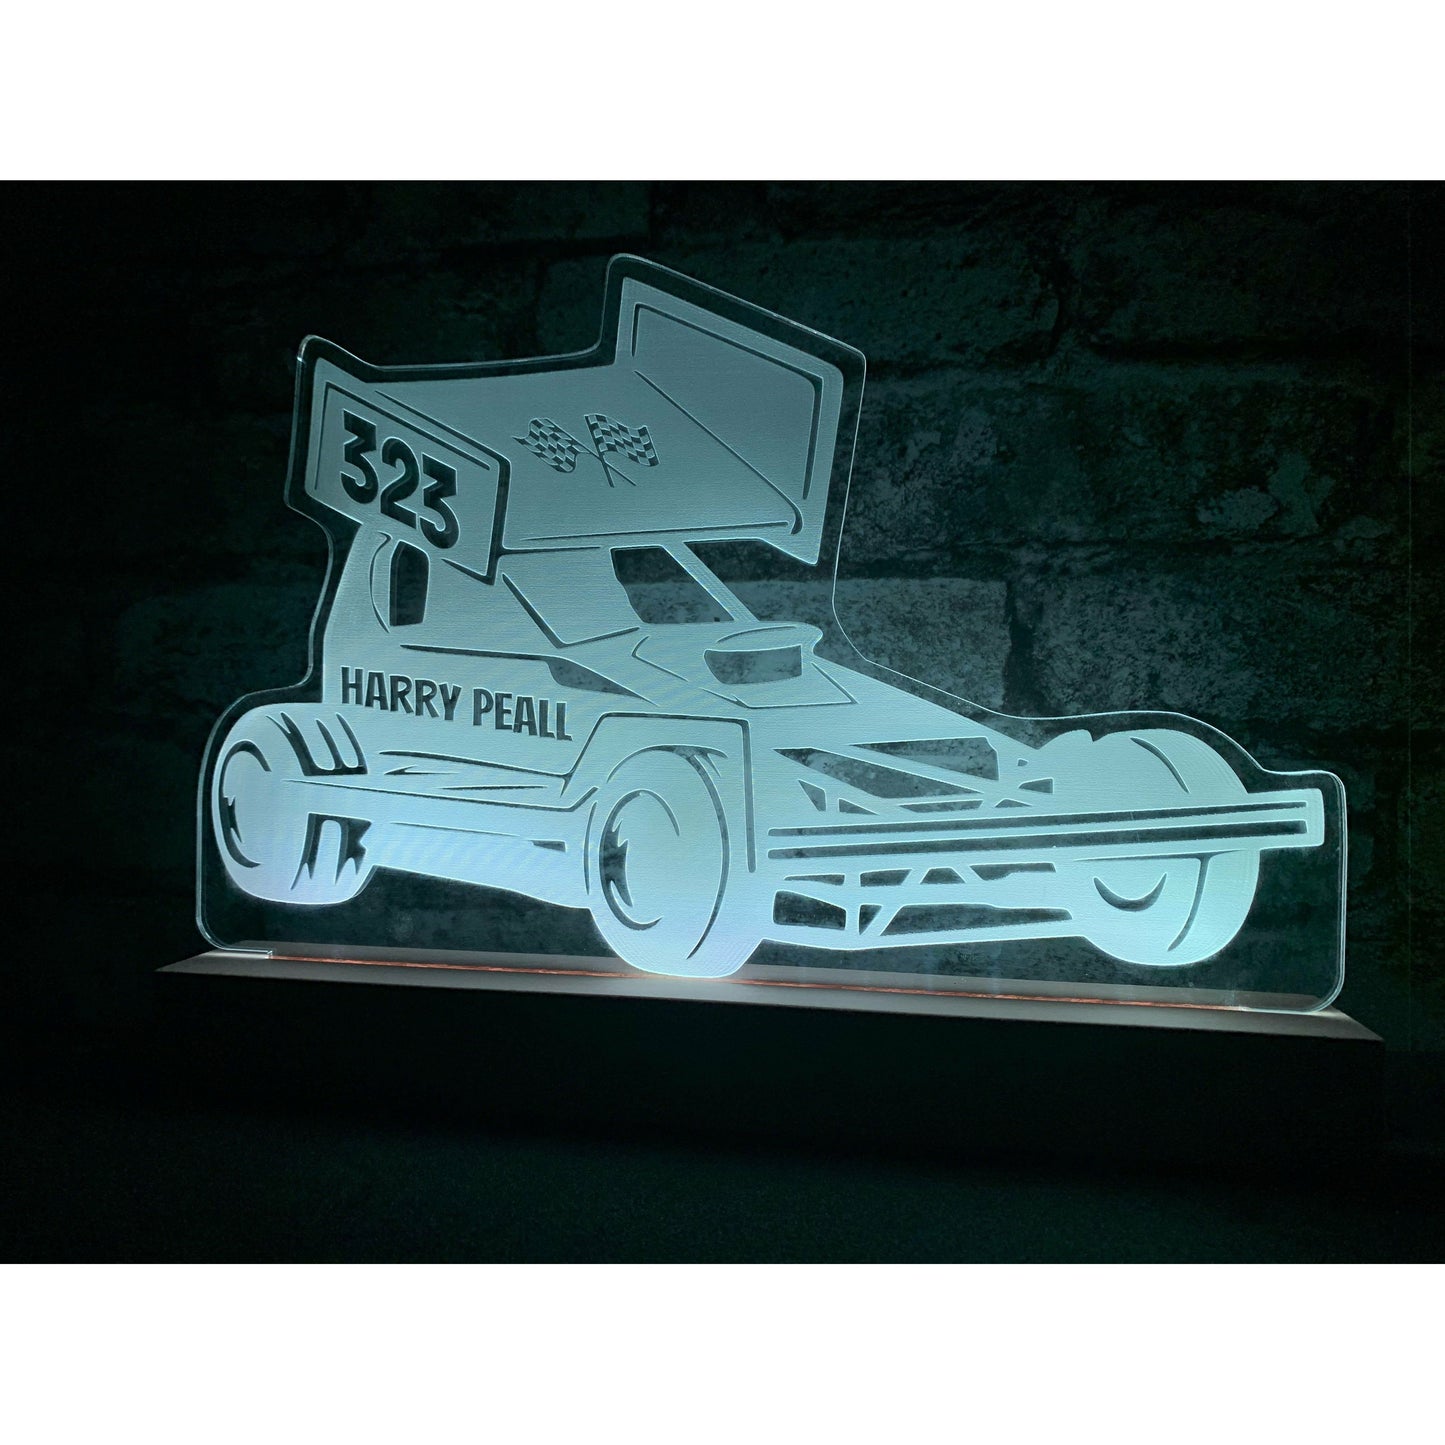 FROSTED Brisca F1 Night Light - Large Wooden Base - Night Light - Stock Car & Banger Toy Tracks